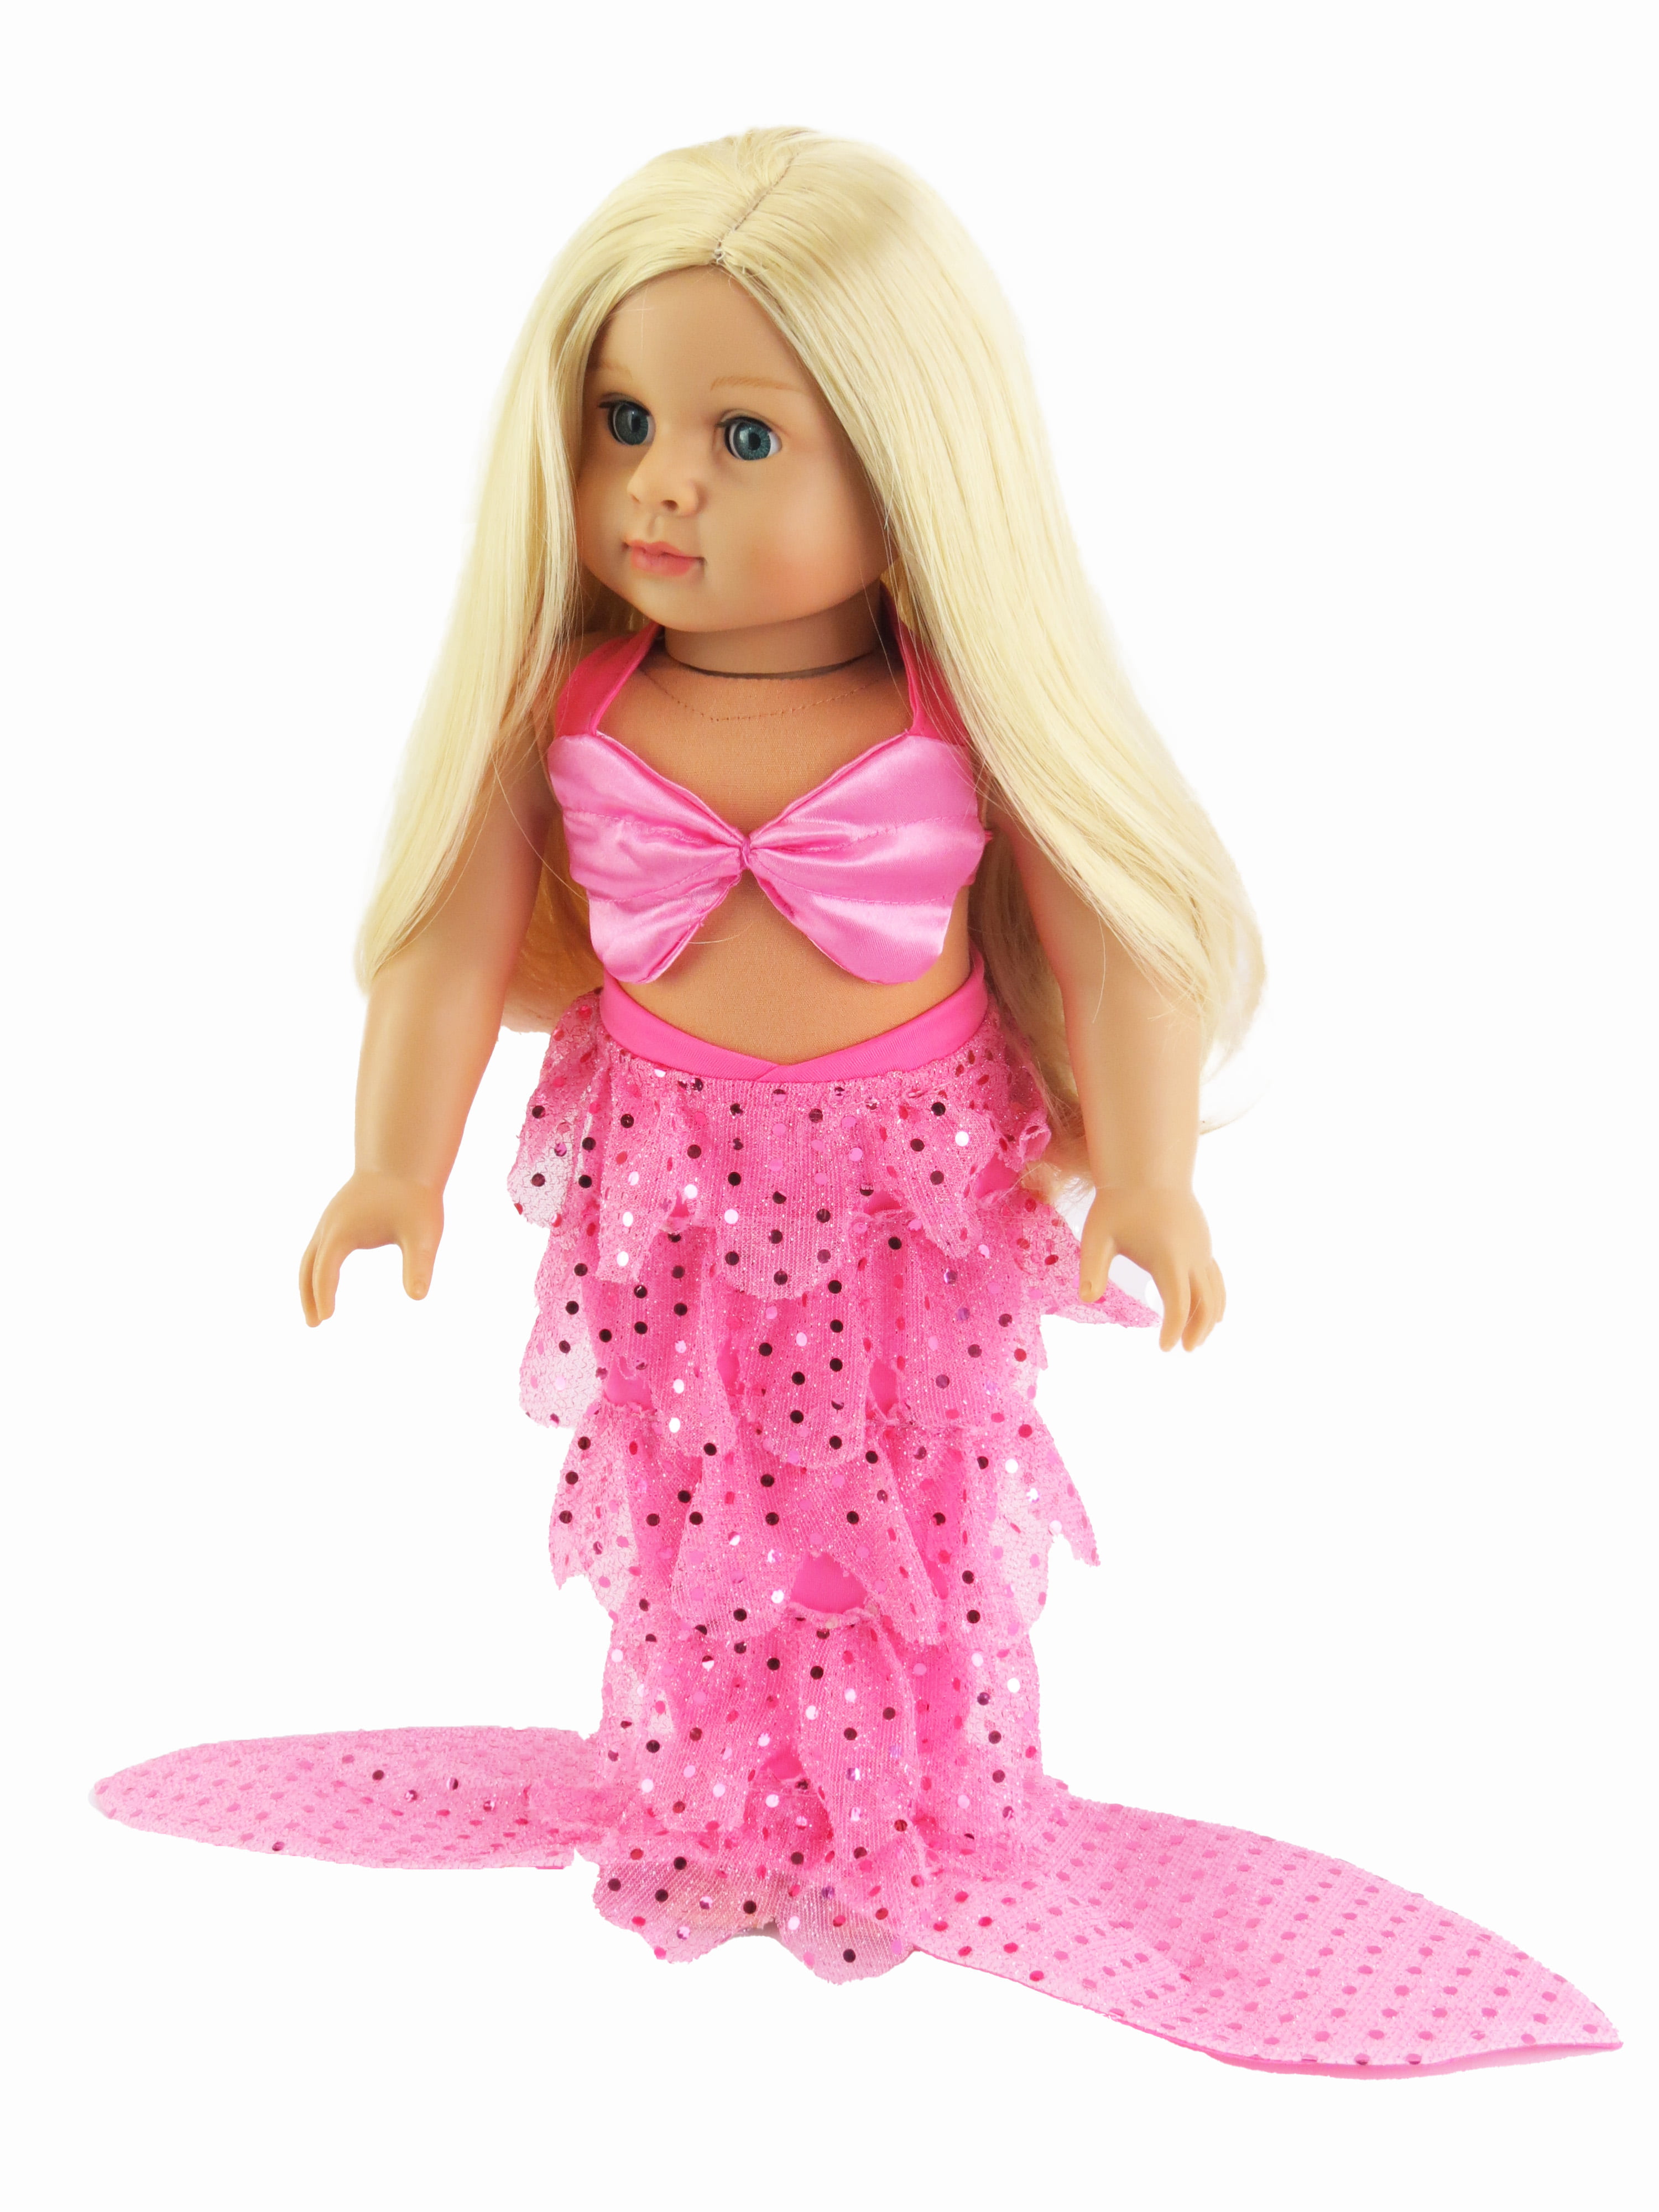 XFEYUE 18 inch Doll Clothes and Accessories for American 18 inch 